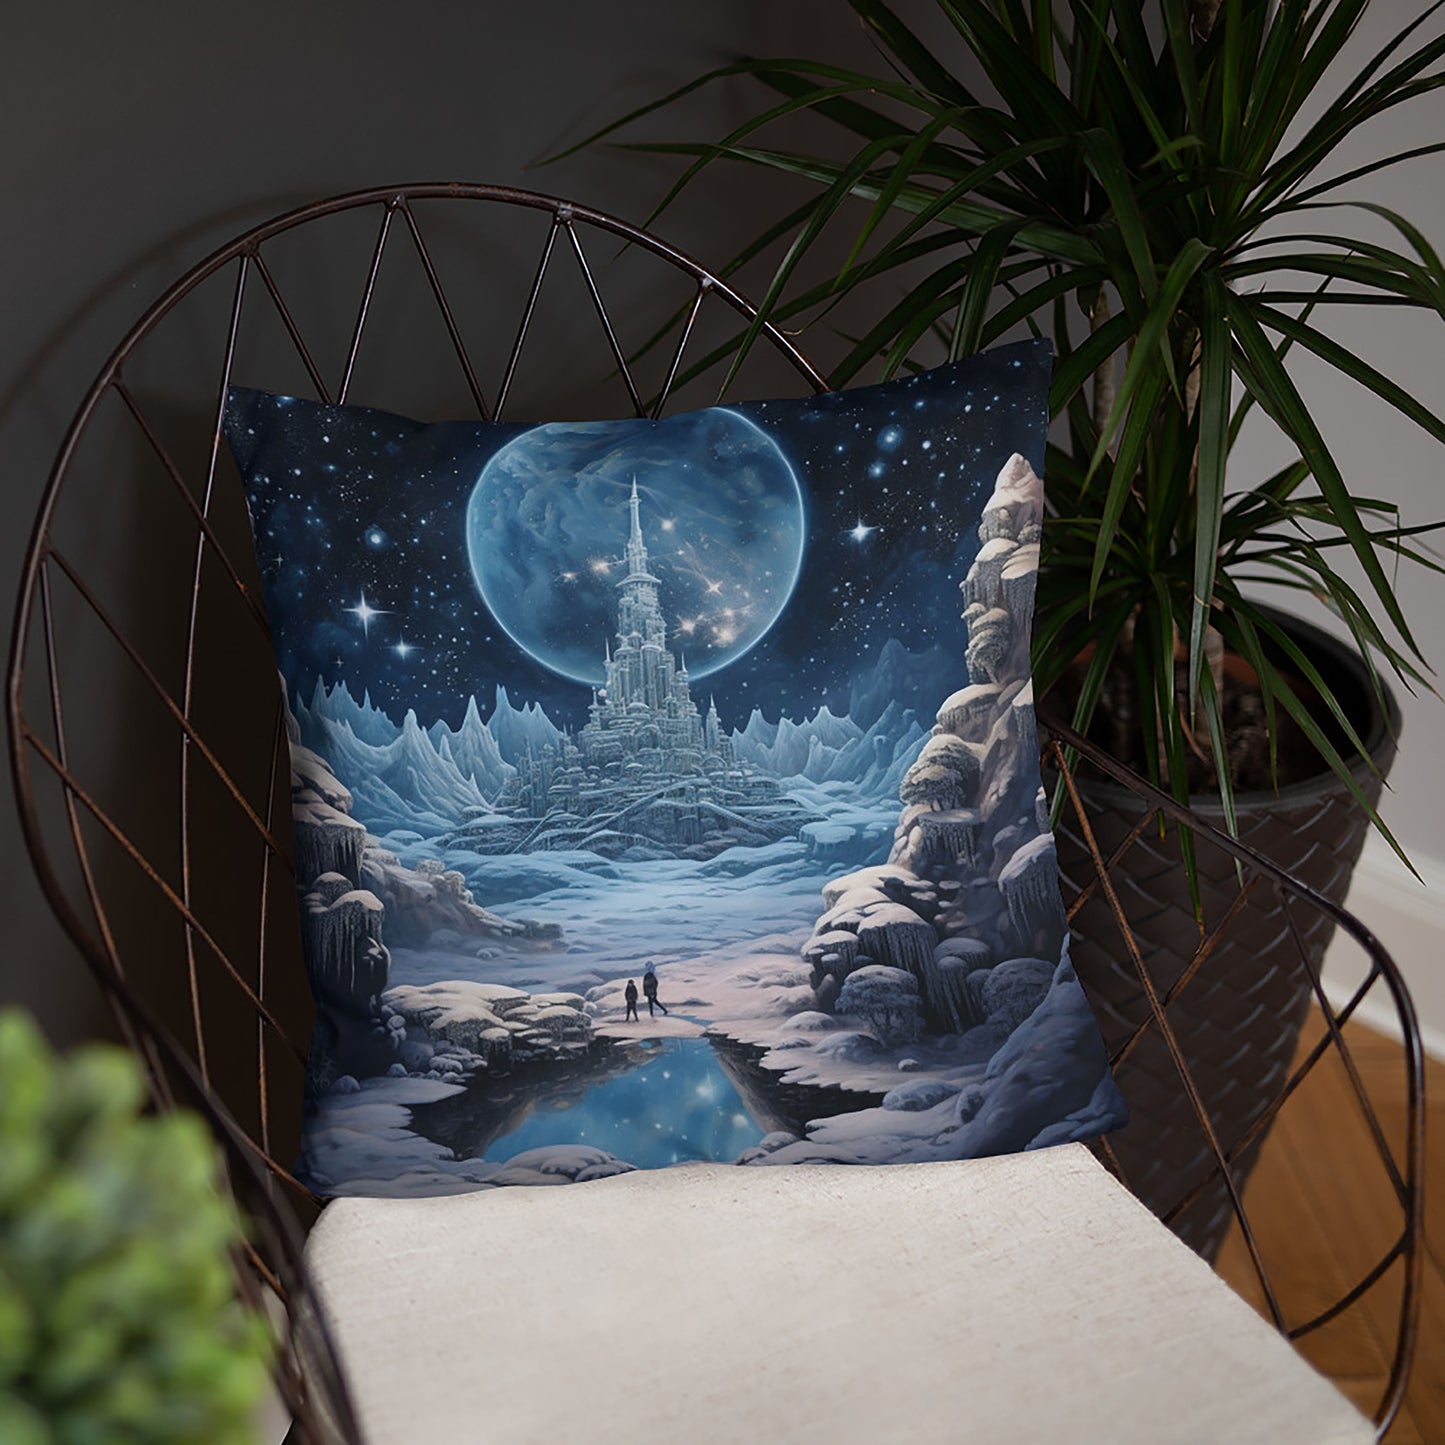 Castle Throw Pillow Lunar Icy Moonscape Polyester Decorative Cushion 18x18